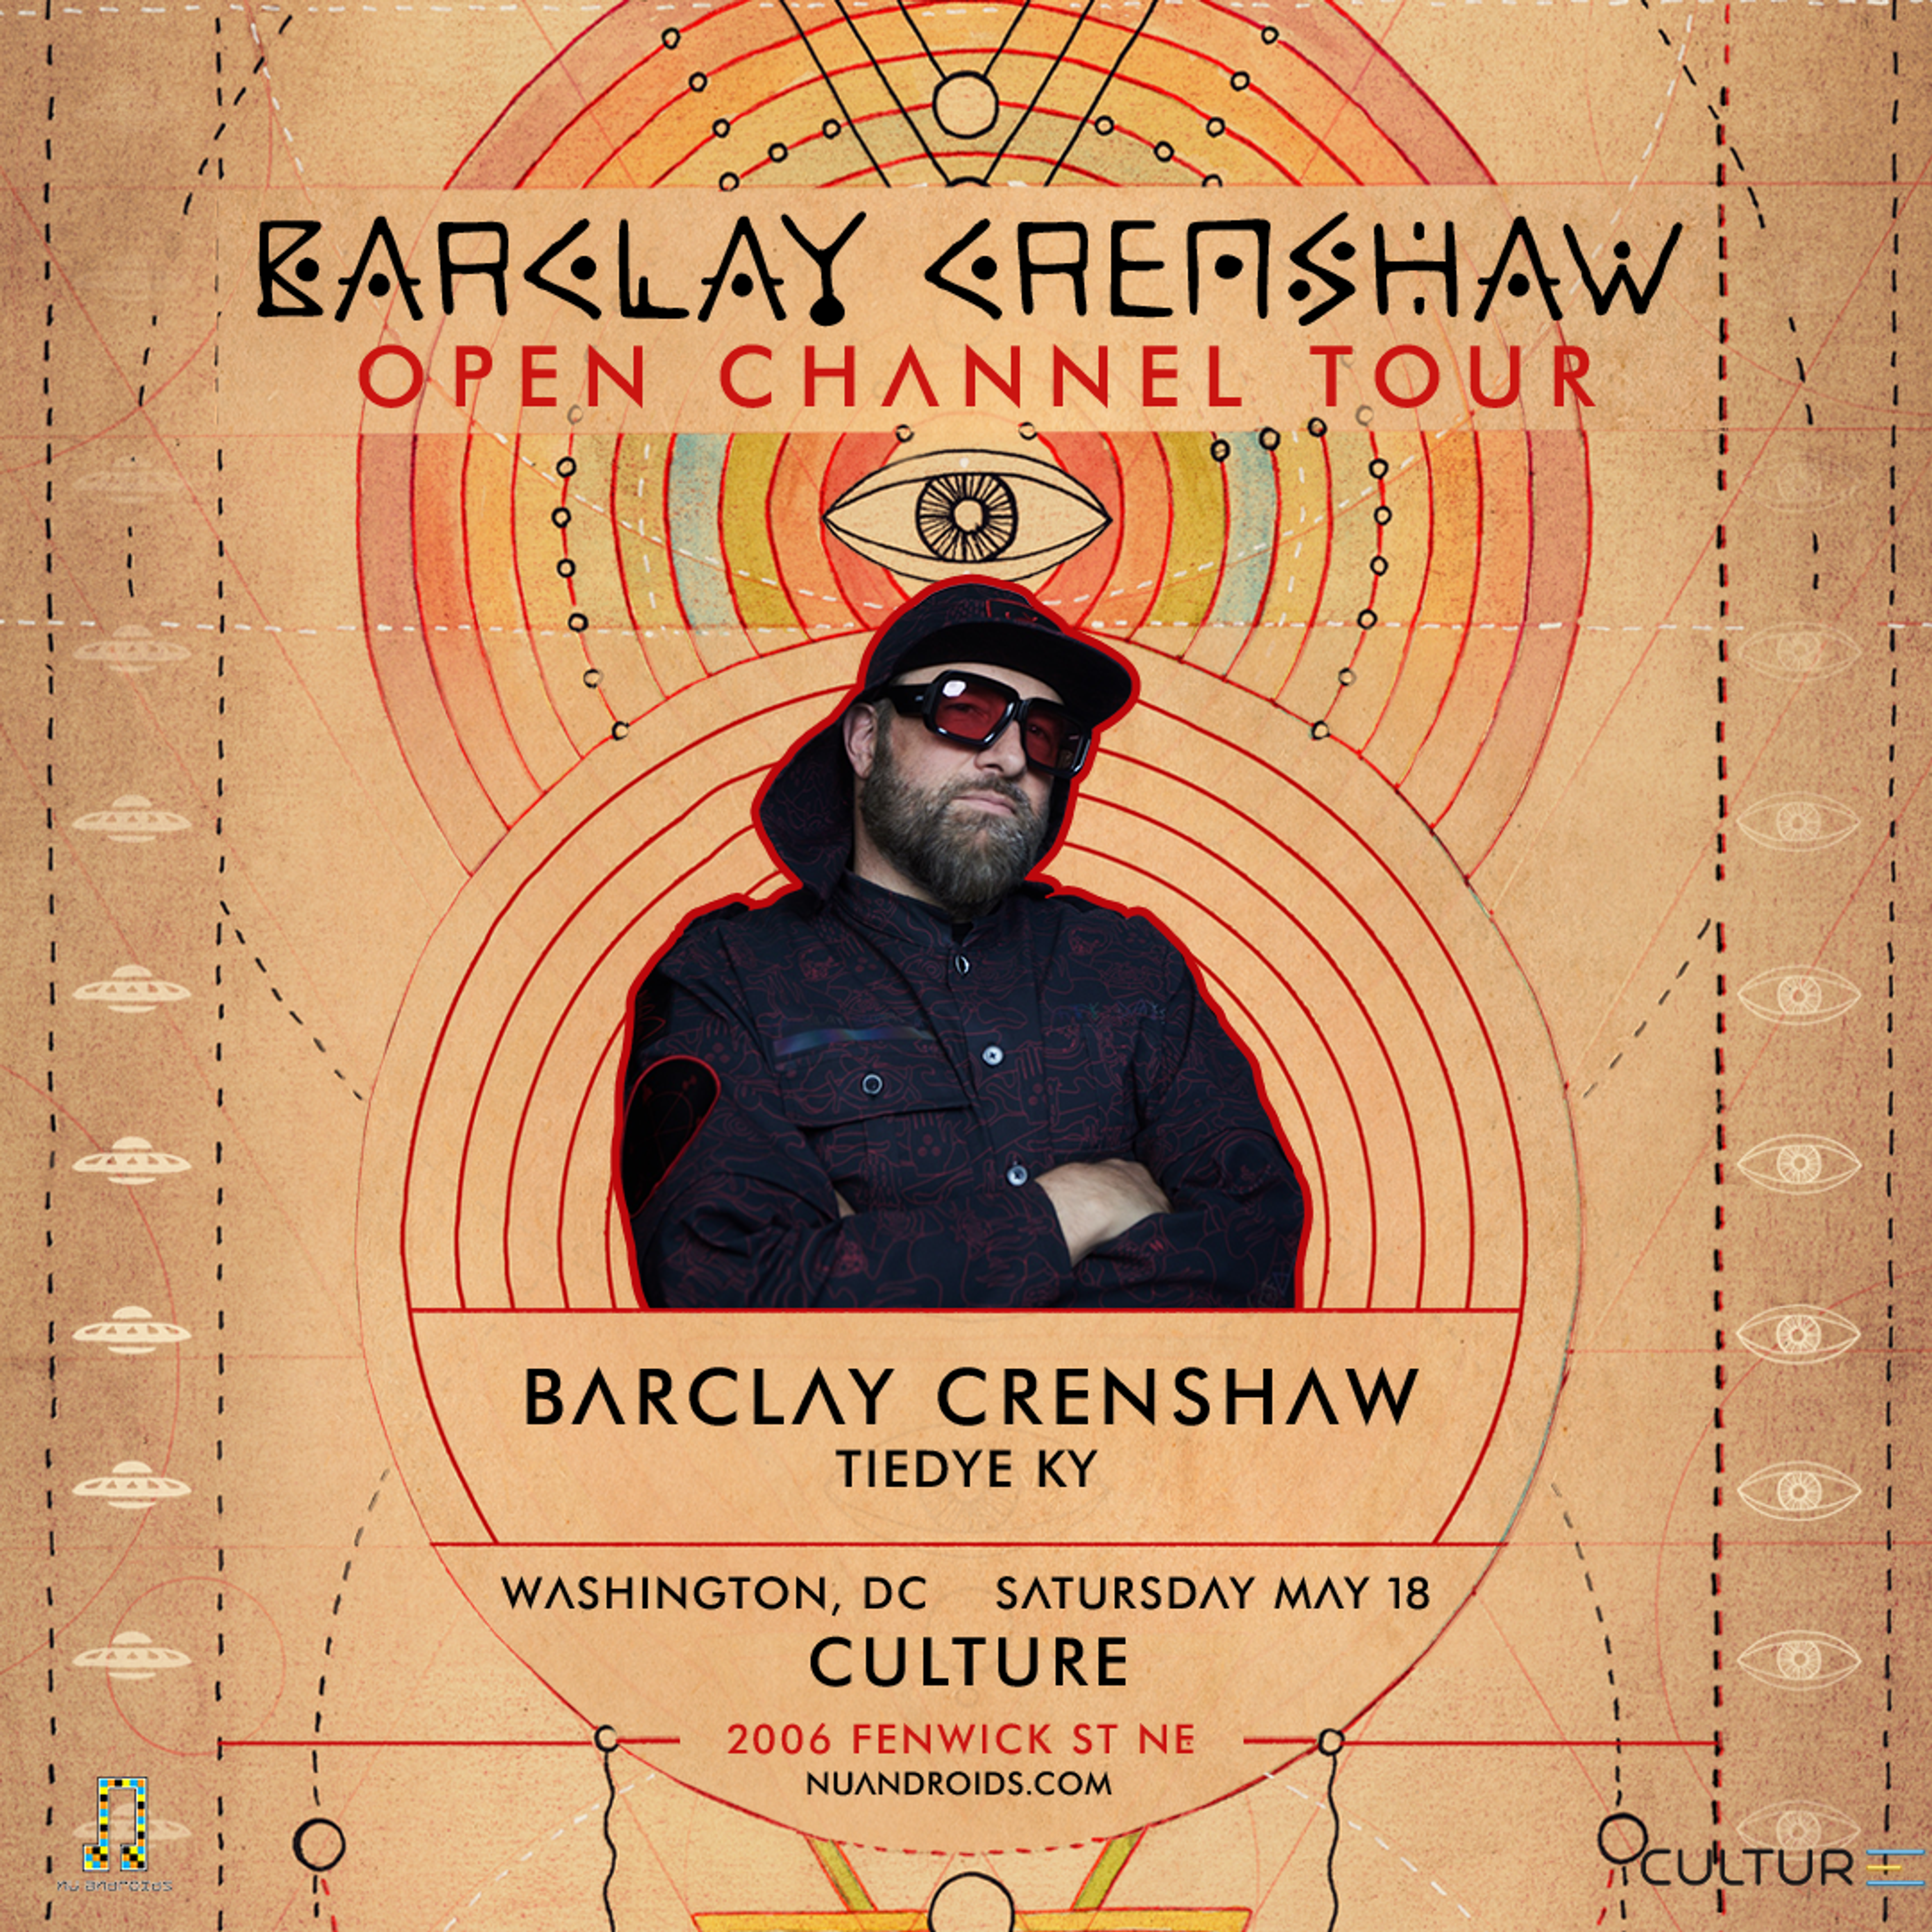 Flyer image for Barclay Crenshaw